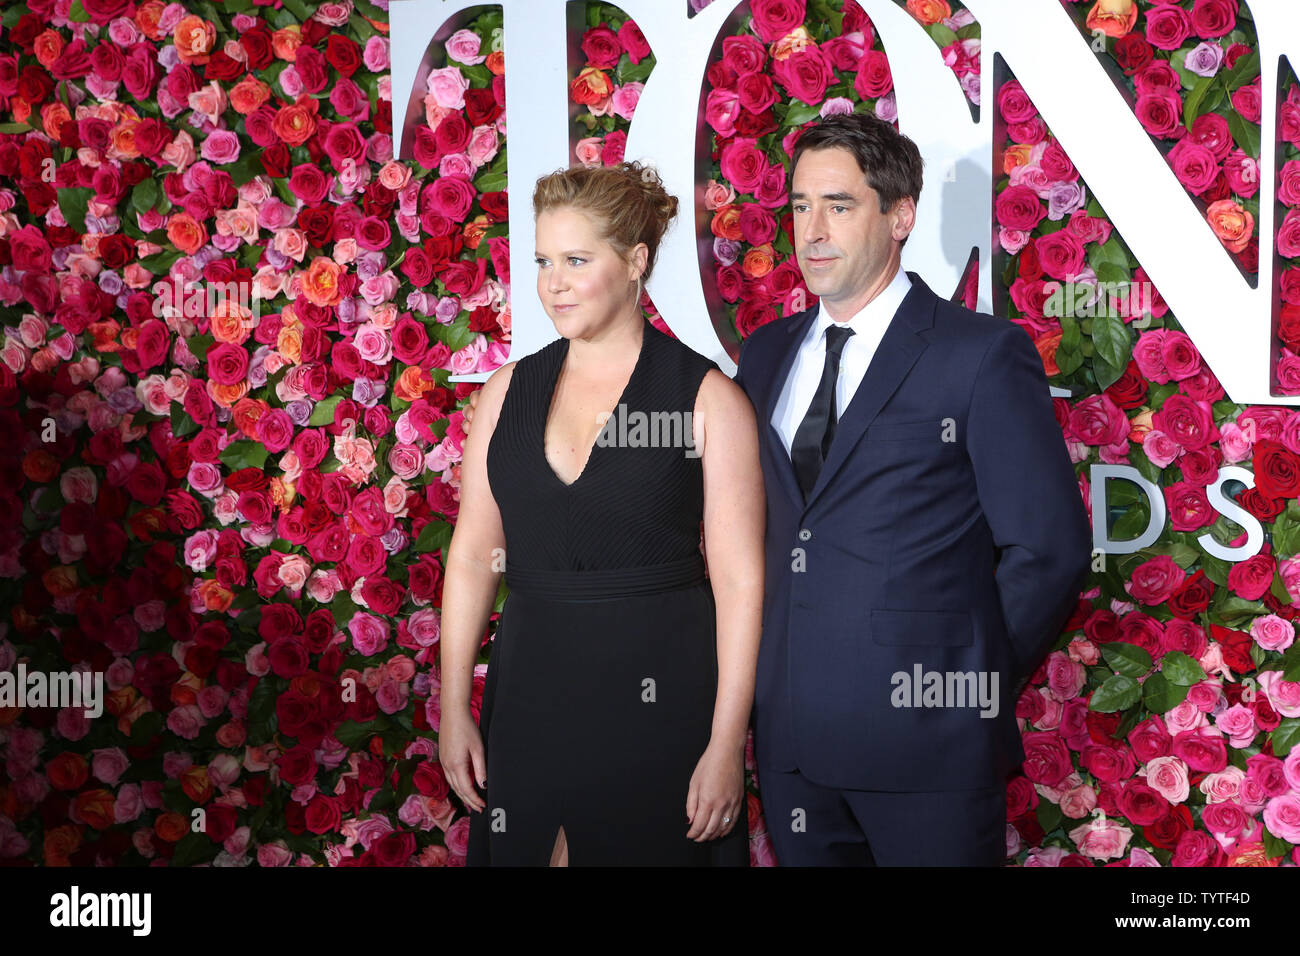 Amy Schumer and Fischer arrive on the red carpet at the 72nd Annual Tony Awards at Radio City Music Hall on June 10, 2018 in New York City. Photo by Serena